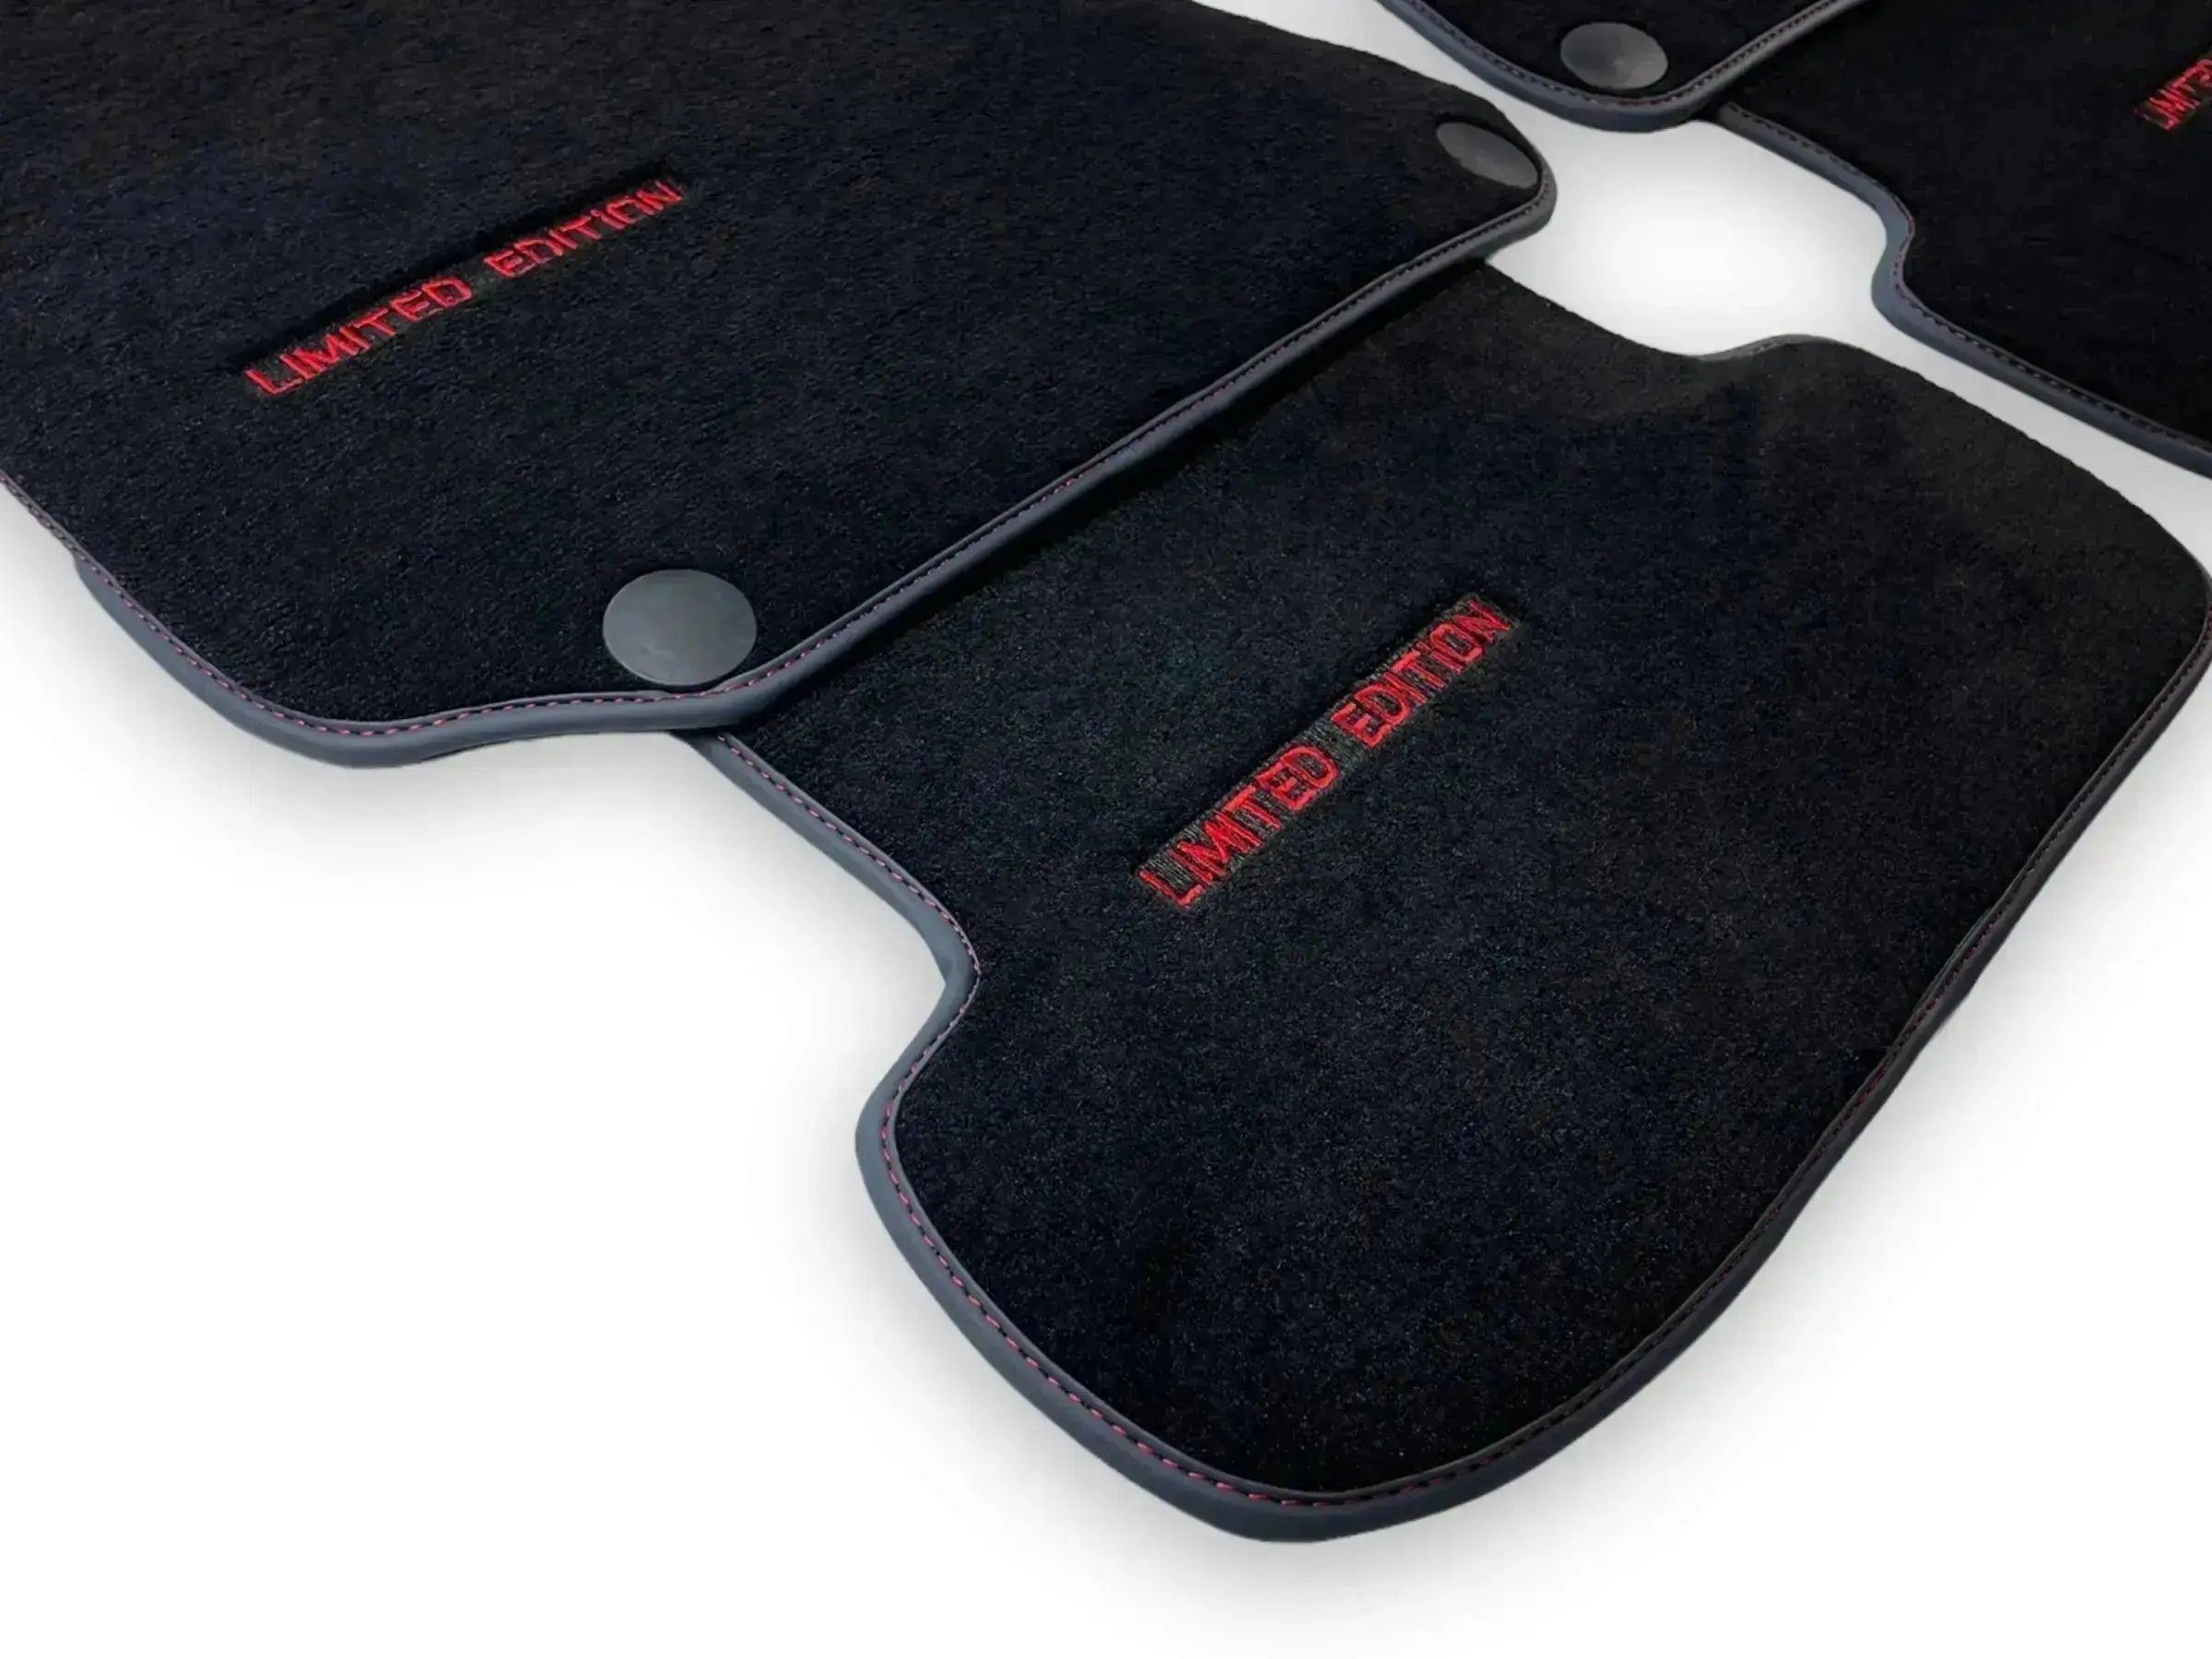 Black Floor Mats For Mercedes Benz GLC-Class C253 Coupe (2019-2023) | Limited Edition - AutoWin